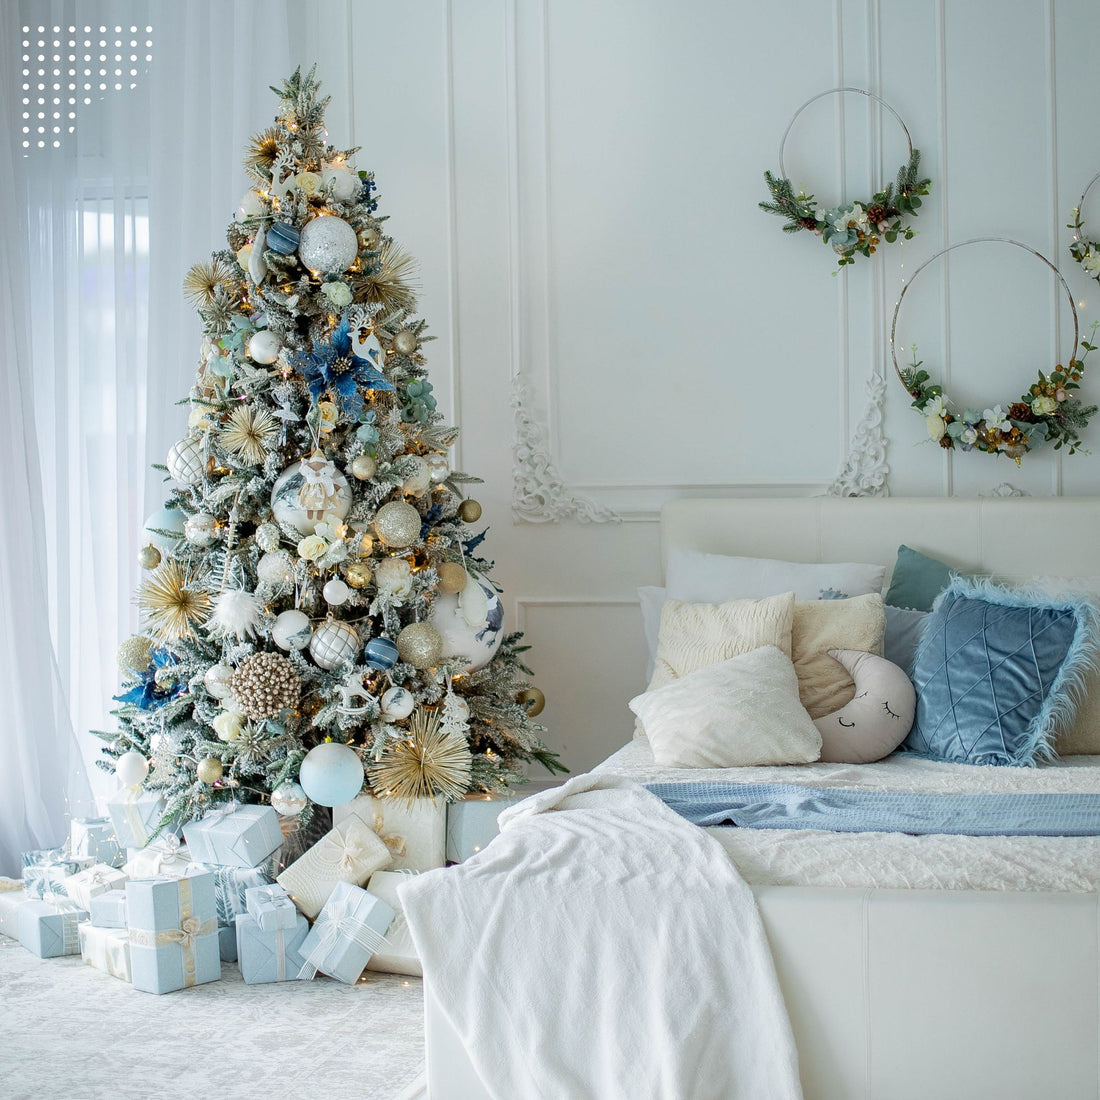 The Ultimate Guide to Christmas Shopping for Your Short-Term Rental in 2022